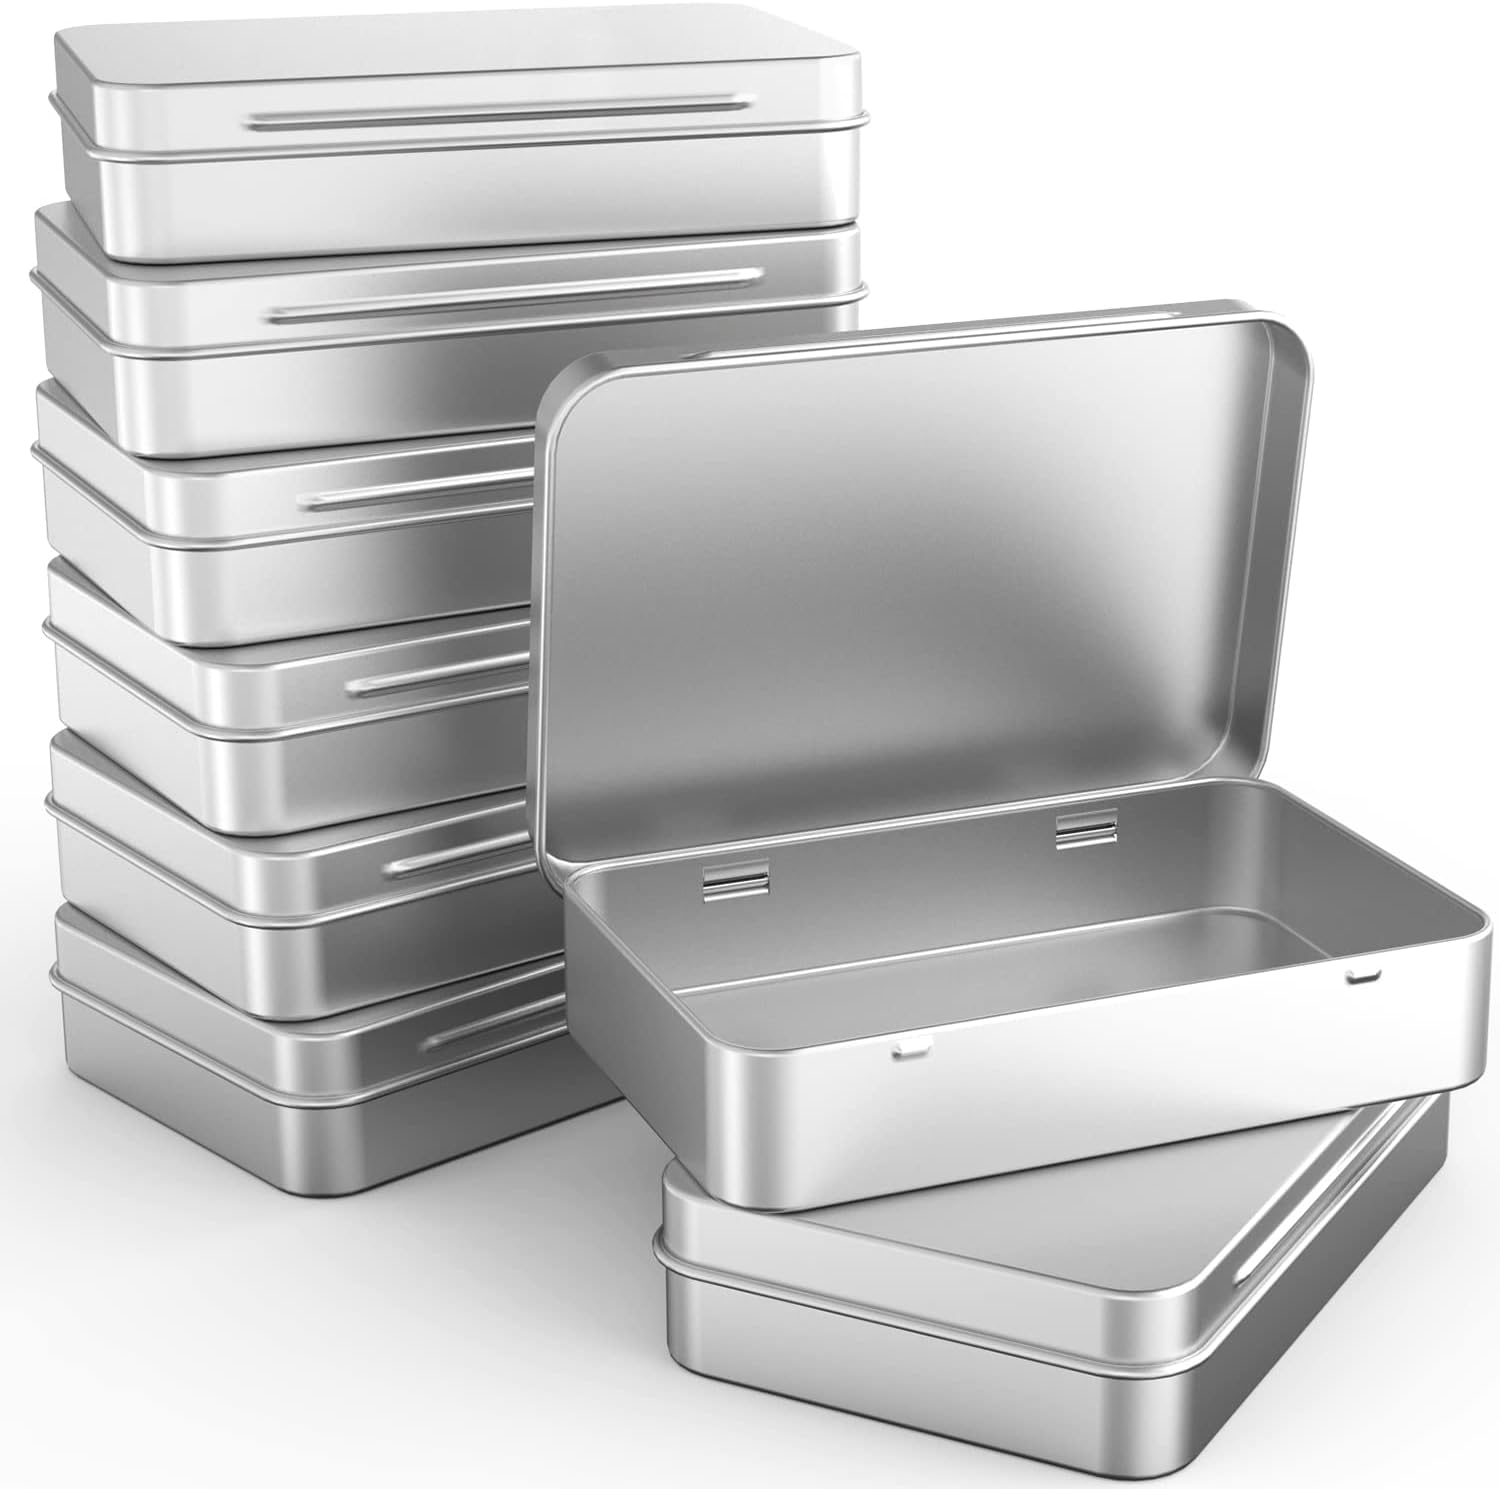 Hotop 8.5 by 5.3 by 1.9 Inch Silver Rectangular Empty Tin Box Containers,  Gift, Jewelery and Storage Tin Kit, Home Organizer